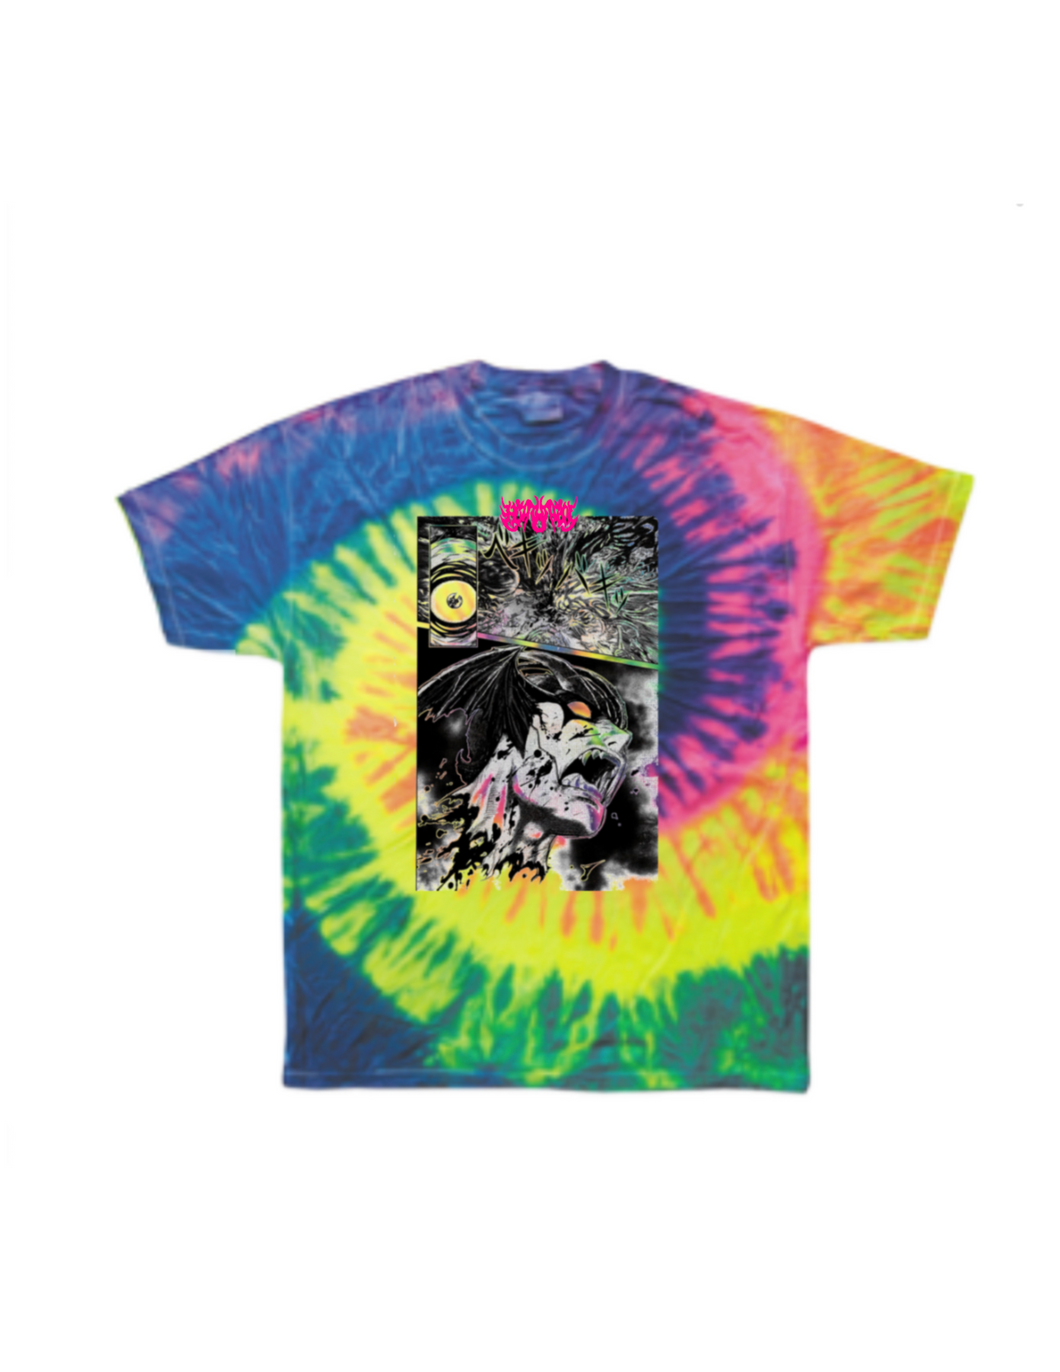 Capitate me ® Embroidered Plutonian Logo Tie Dye Neon Rainbow Adult Tee (NEW/LIMITED!)